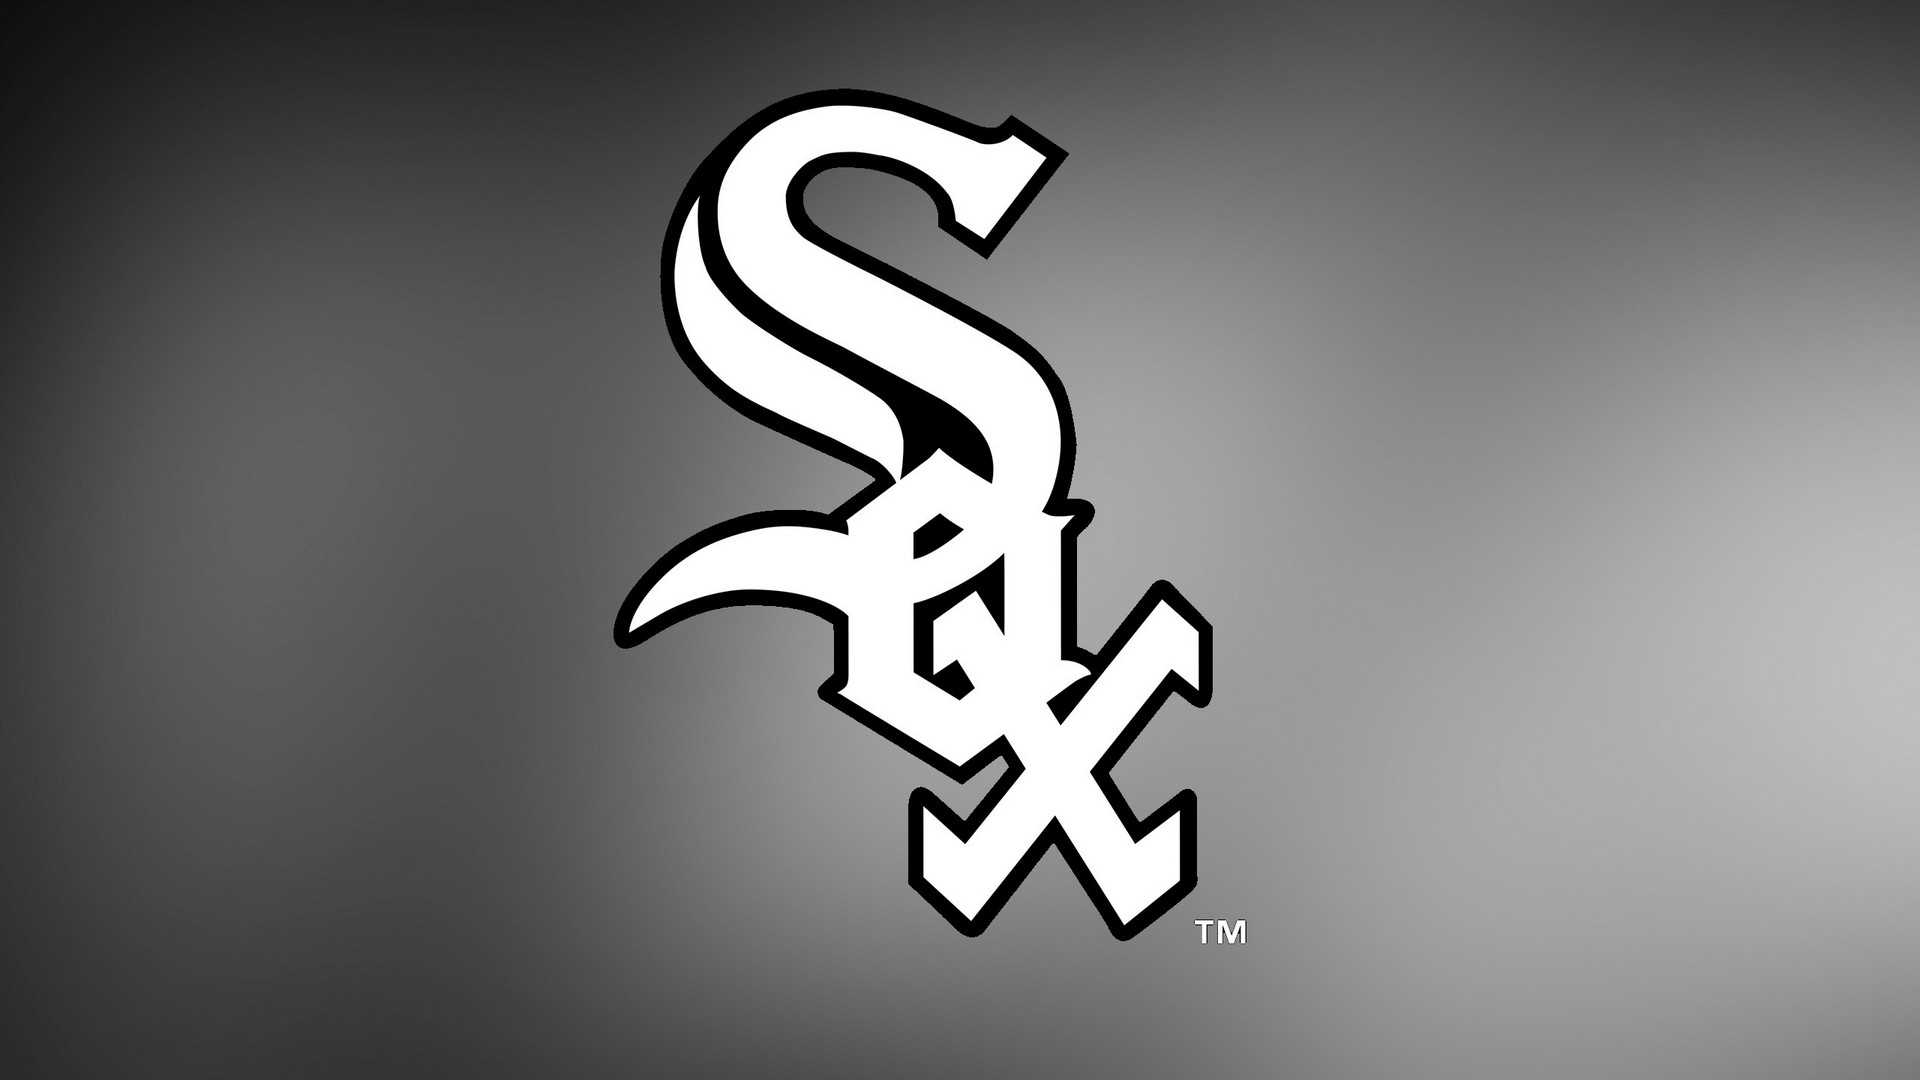 HD Backgrounds Chicago White Sox with high-resolution 1920x1080 pixel. You can use this wallpaper for Mac Desktop Wallpaper, Laptop Screensavers, Android Wallpapers, Tablet or iPhone Home Screen and another mobile phone device